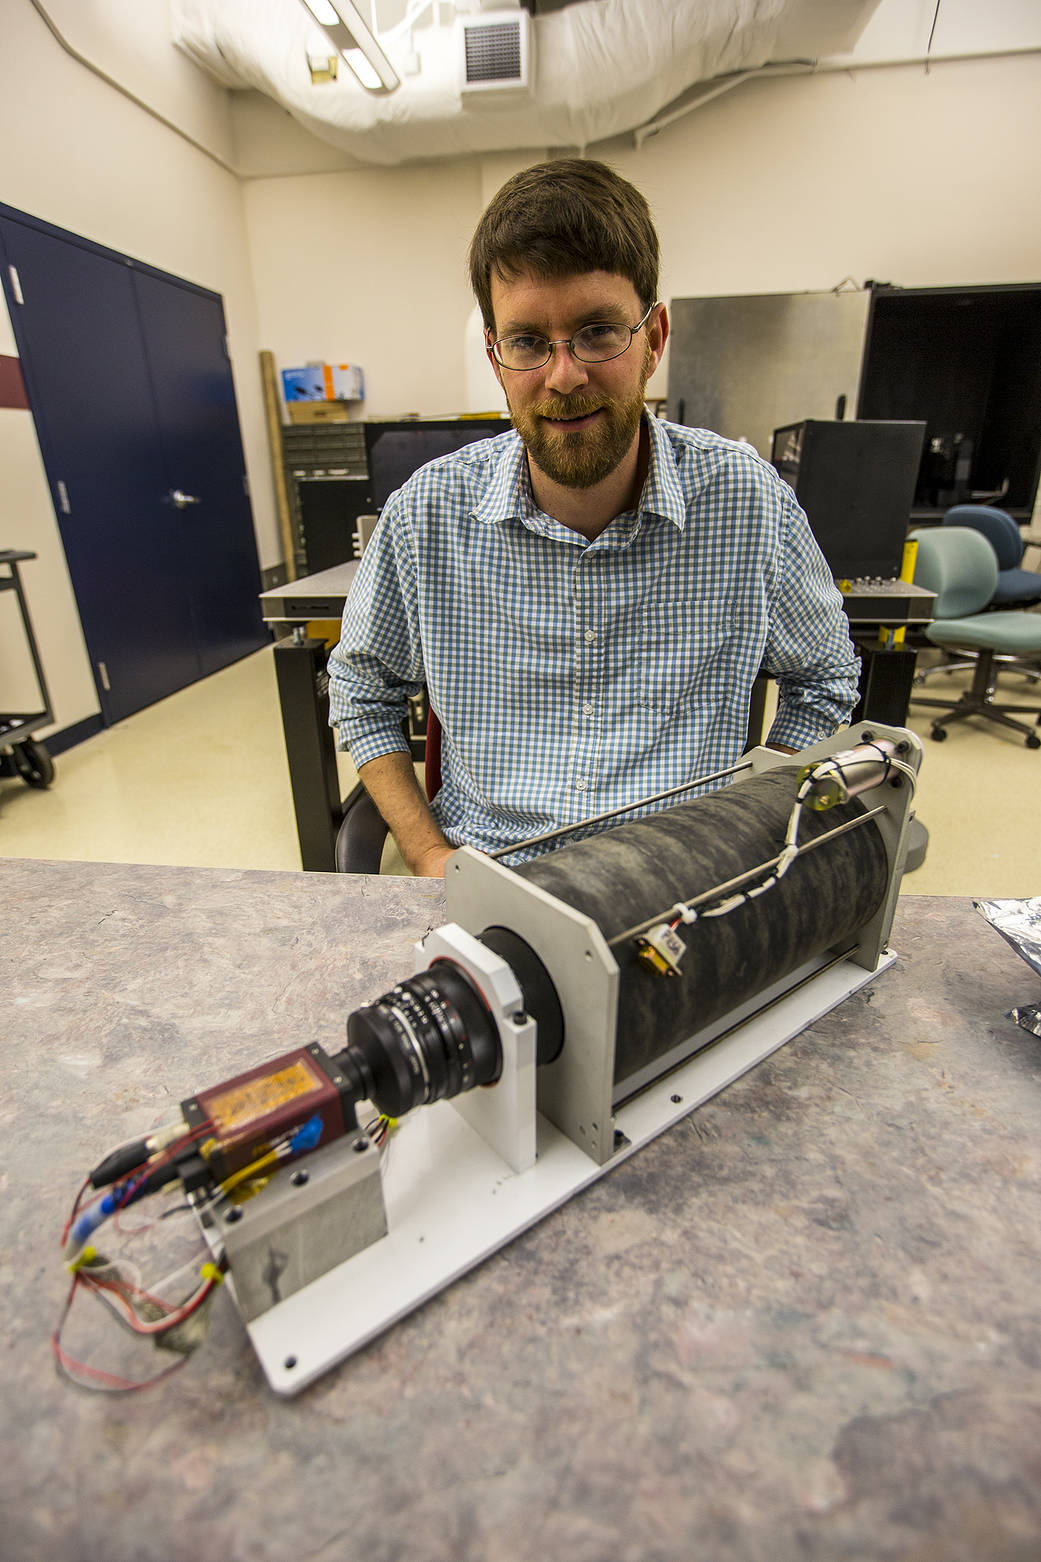 Engineer Scott Heatwole and team are developing a star tracker that would be able to locate stars during daylight hours.